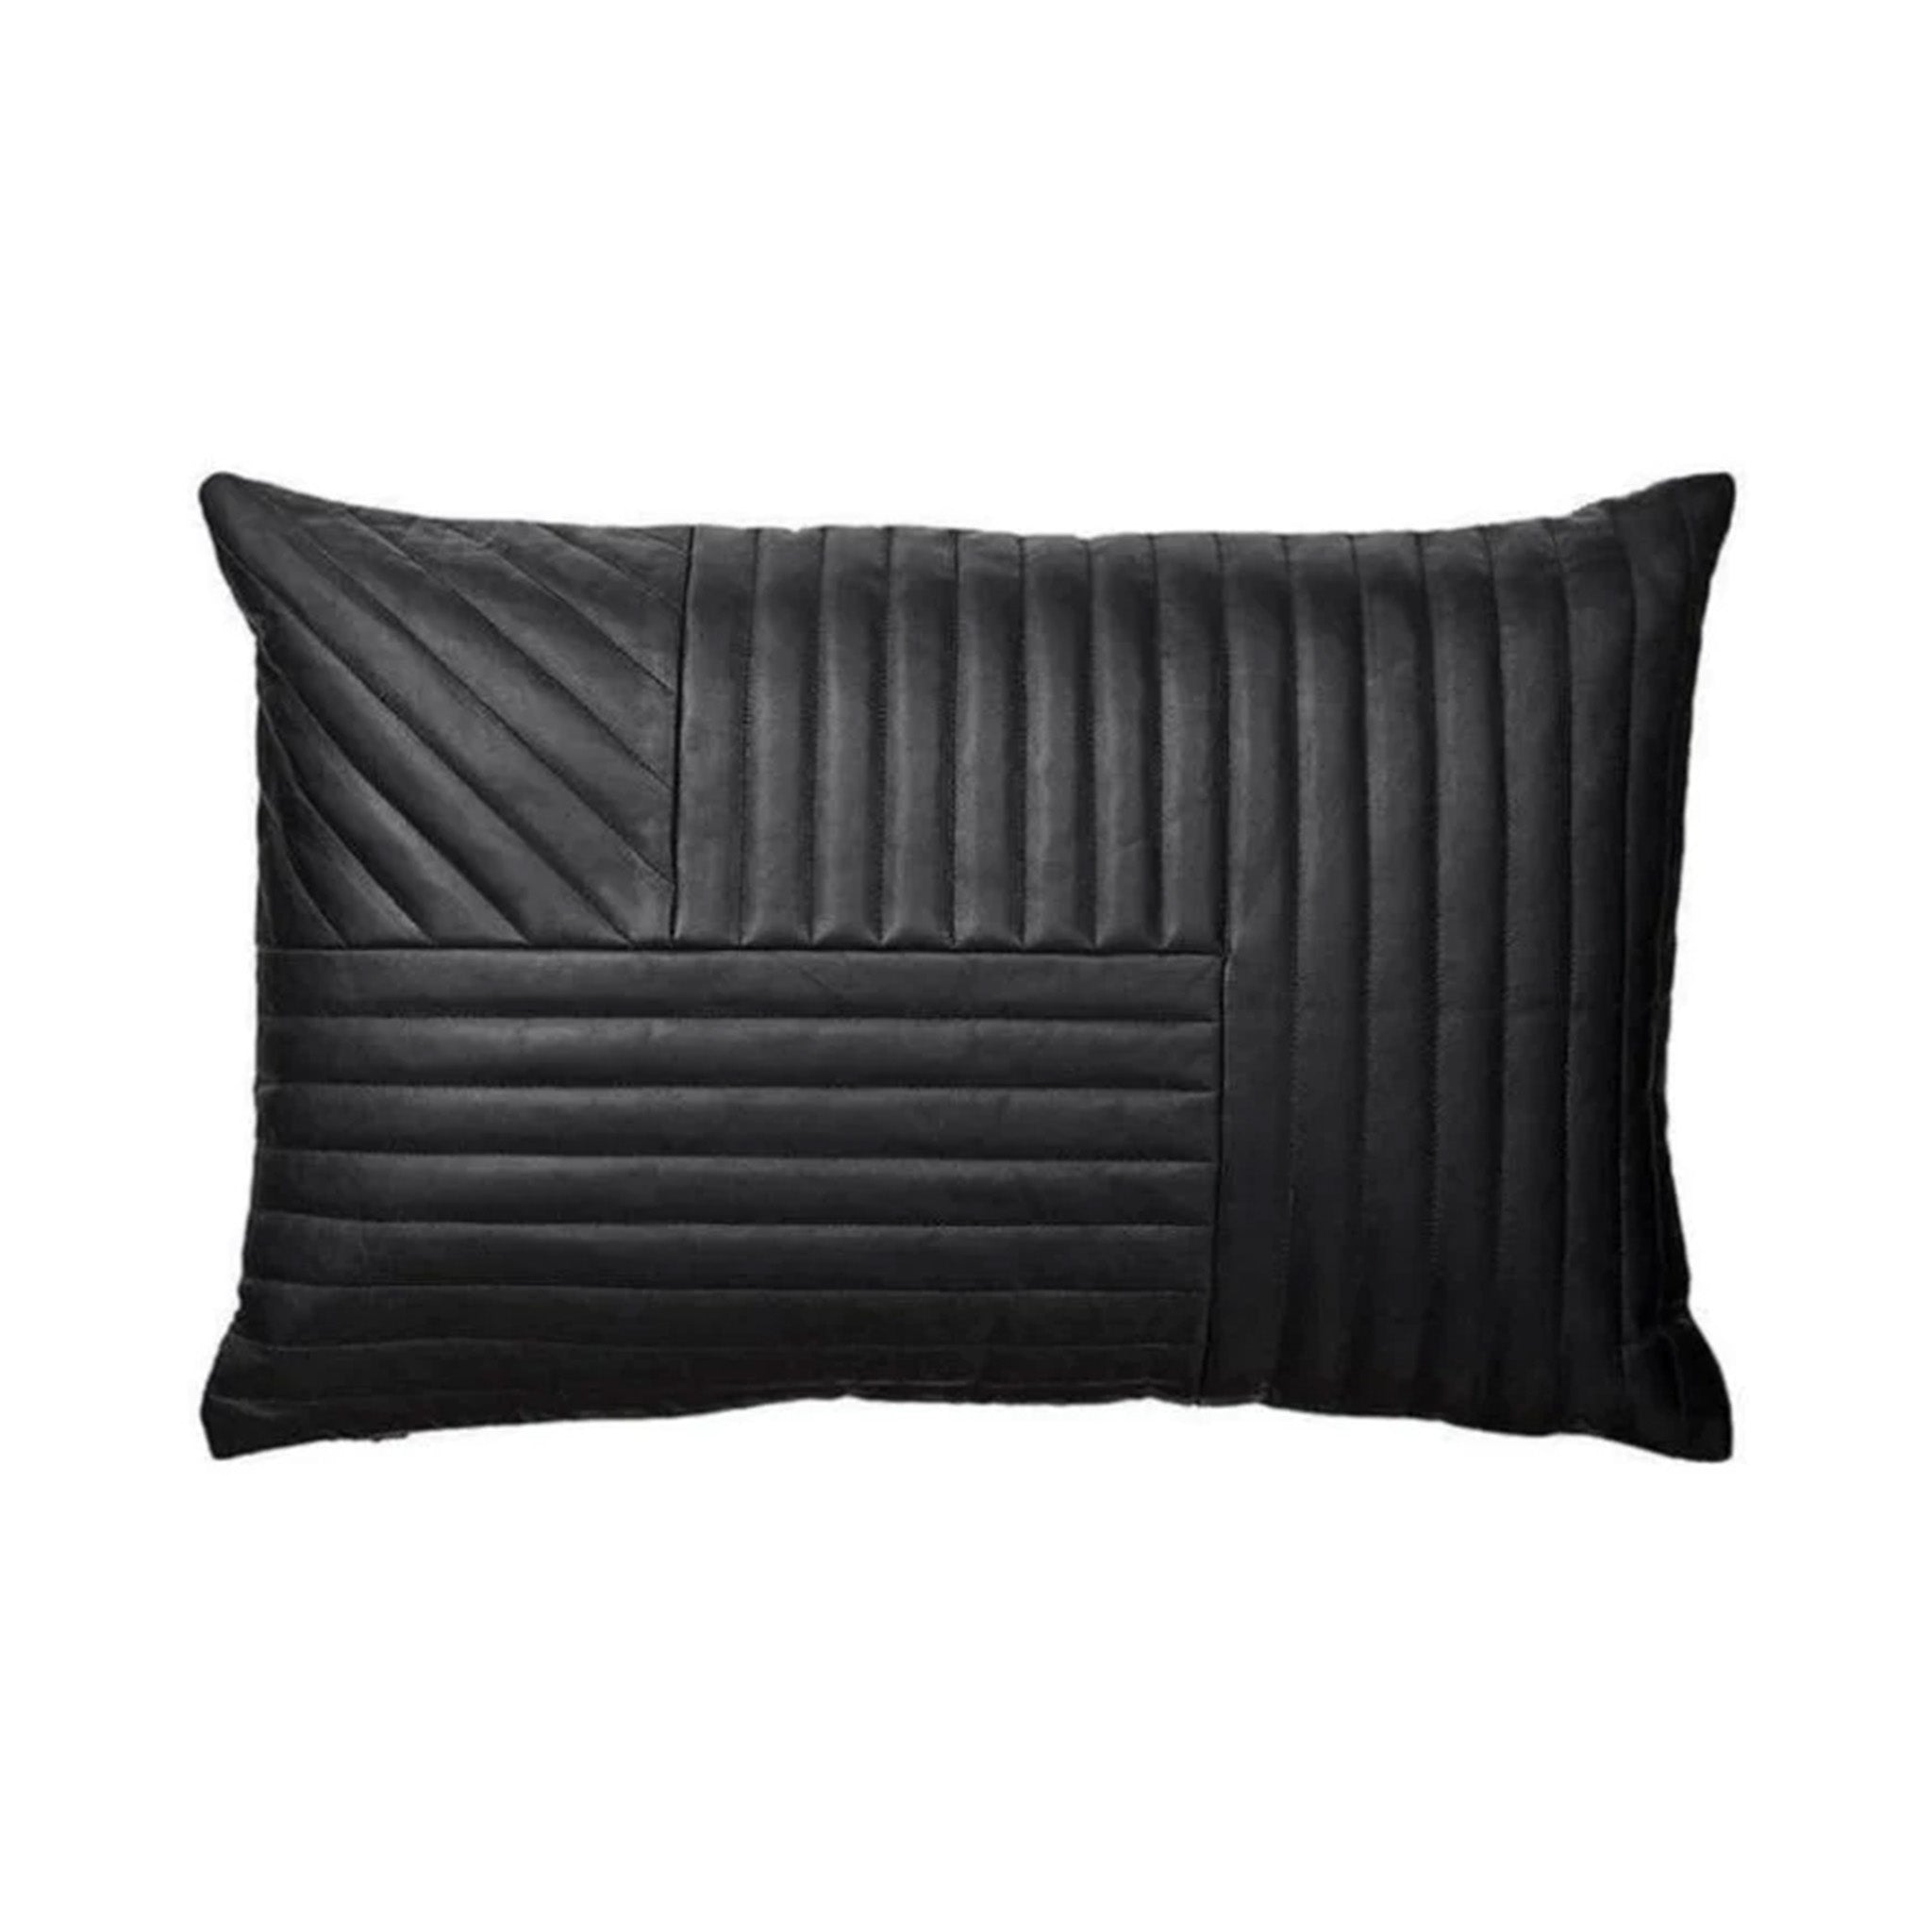 Paneled Style Black Genuine Leather Pillow Cover